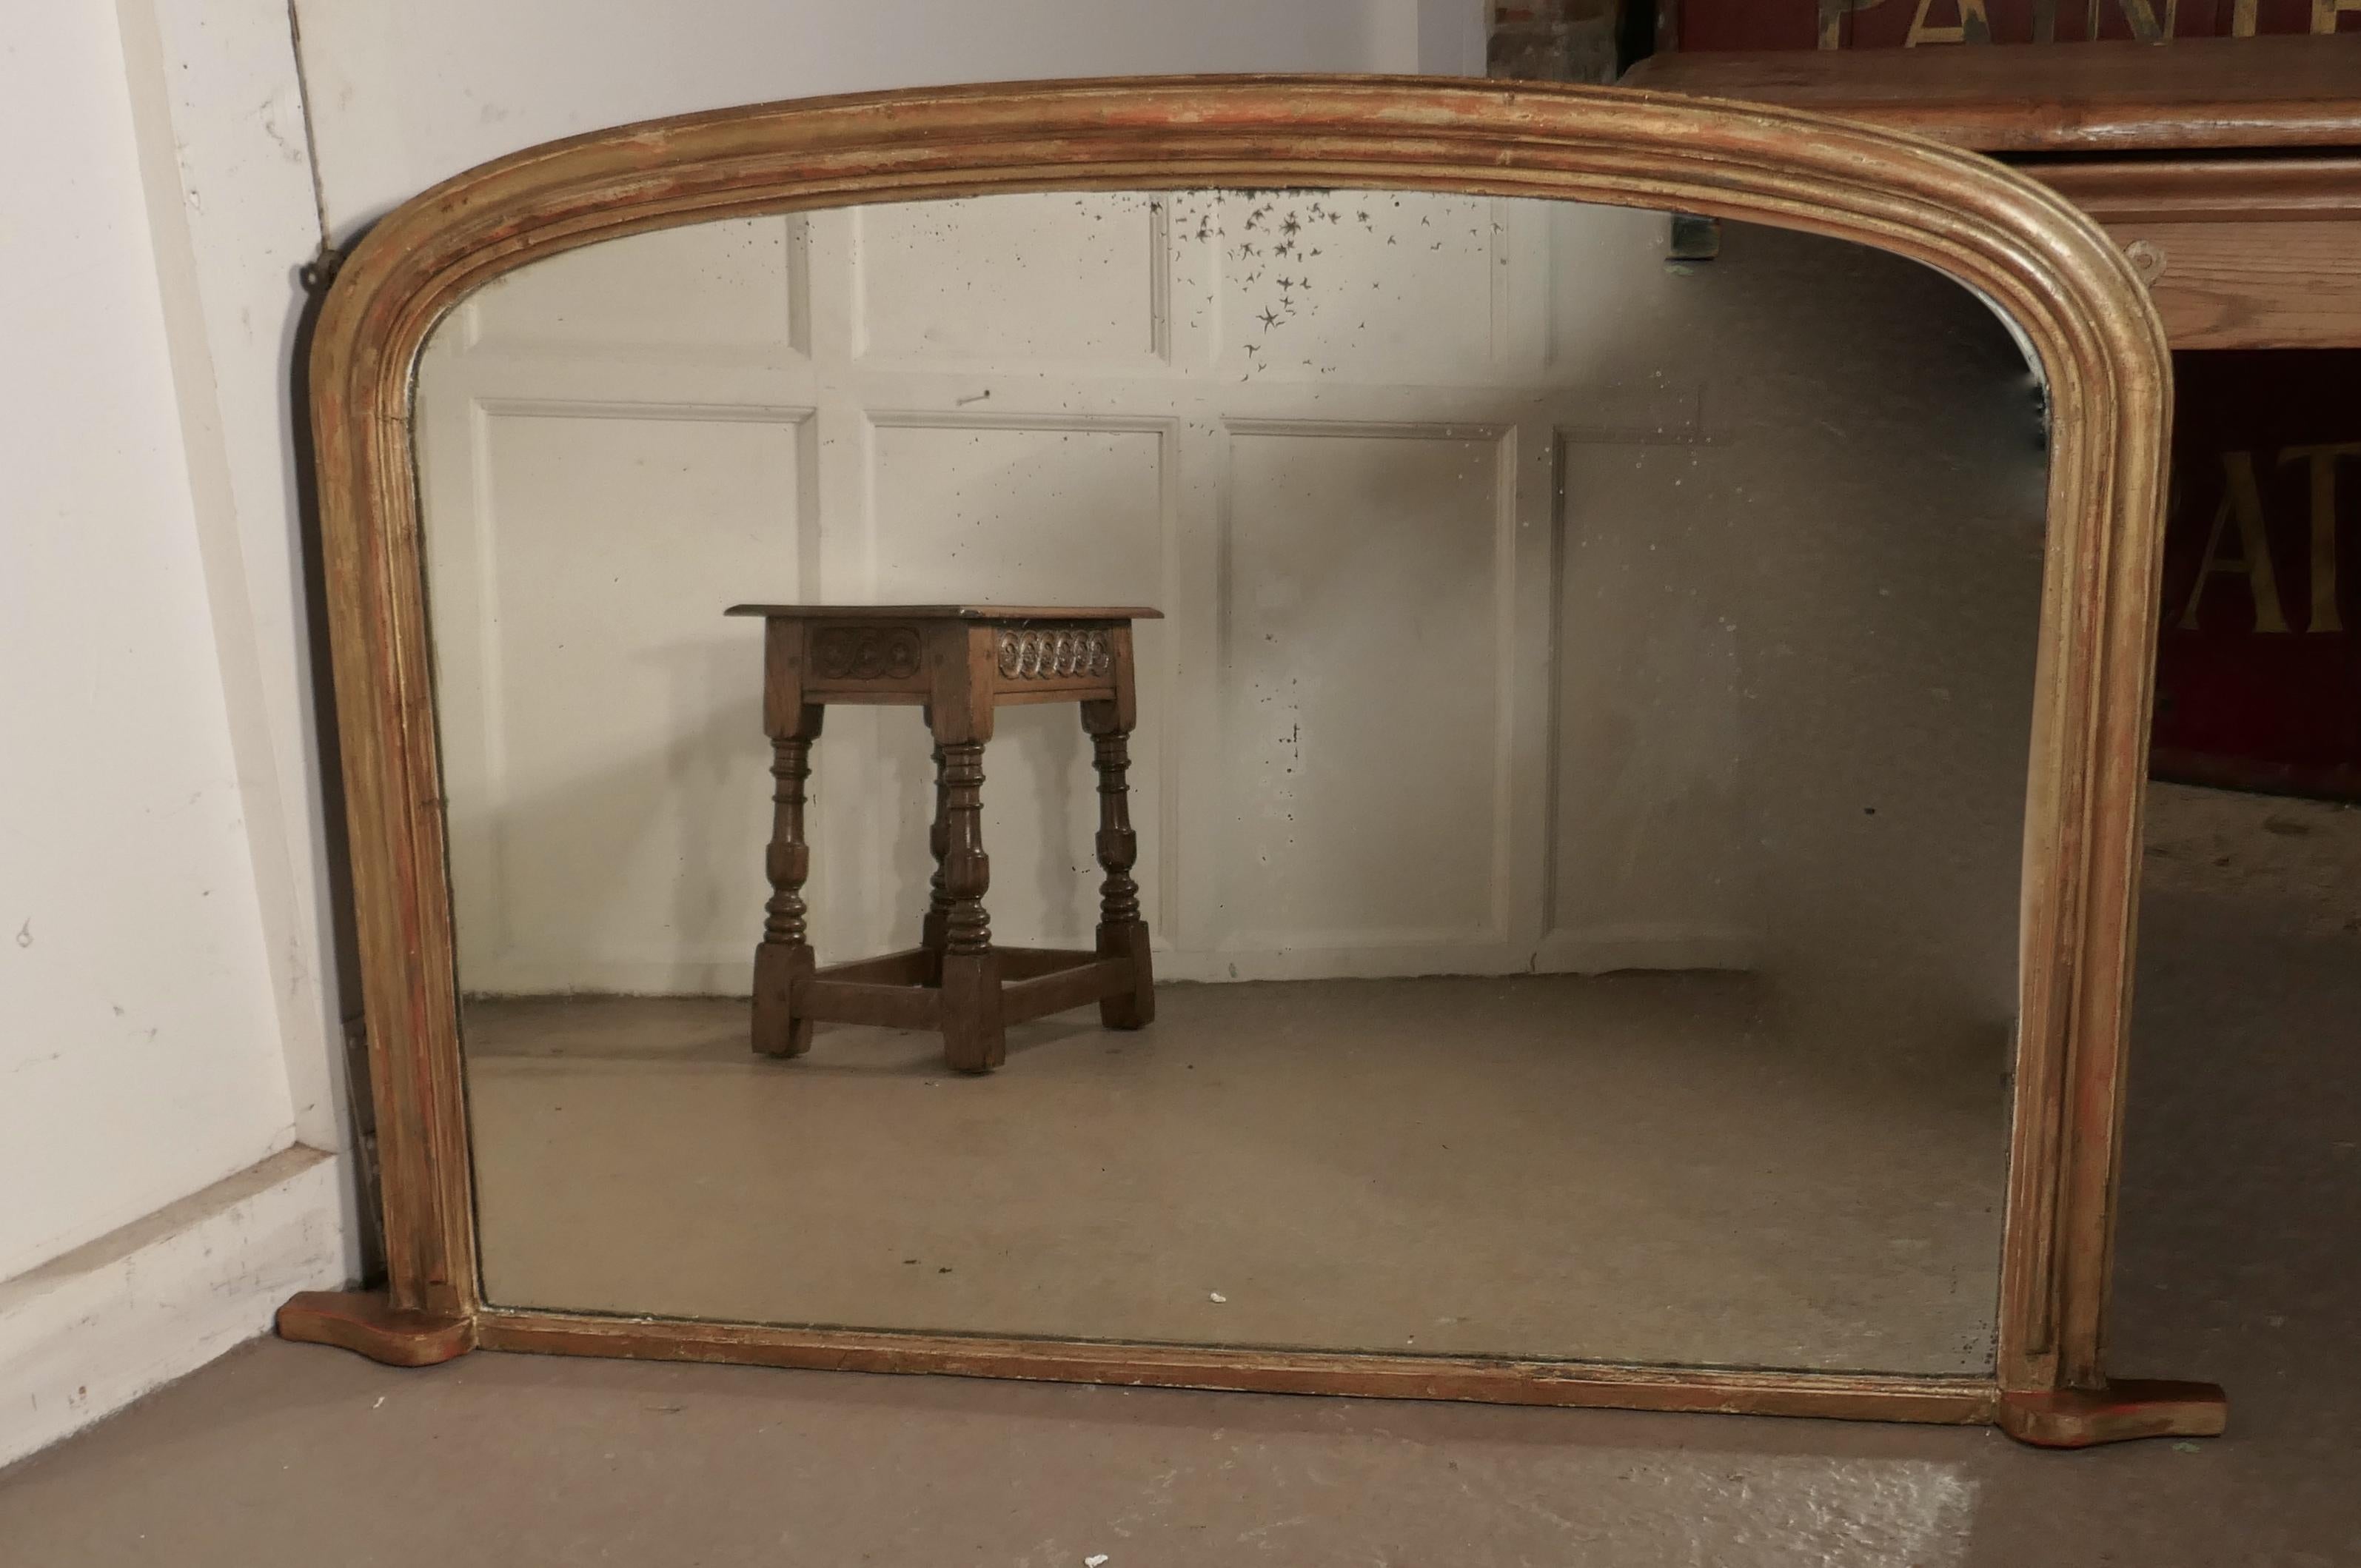 Victorian original shabby look gold overmantel mirror

Victorian shabby gilt overmantel mirror
This is a charming and genuine piece of shabby chic furnishing, the frame is in gold with some of the red undercoat showing through
The mirror is in